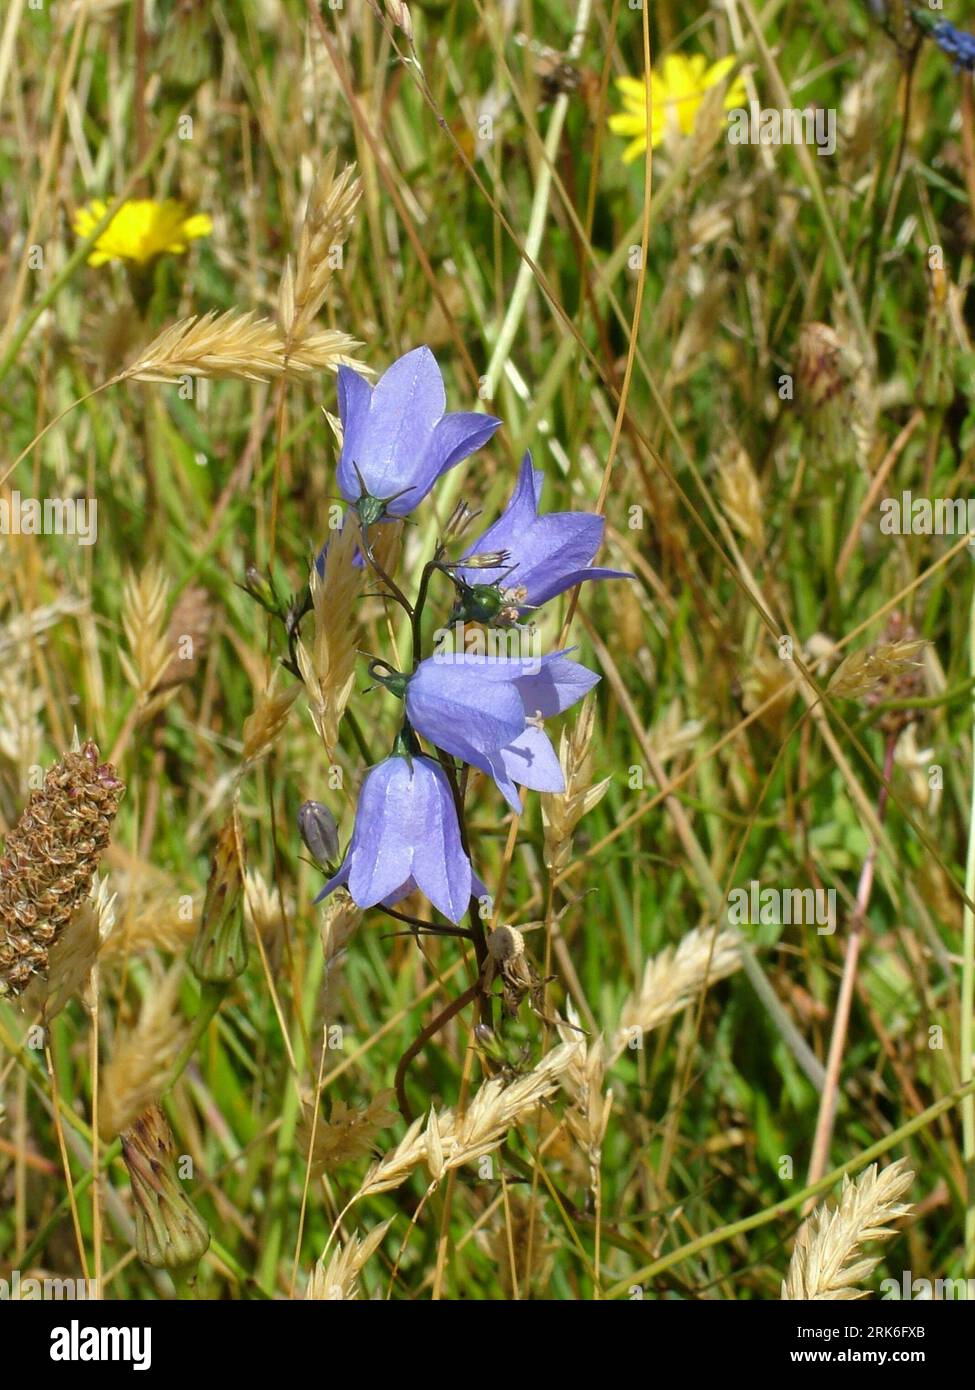 Harebell 'Campanula rotundifolia'  Bell shaped blue wild flower also known as Scottish Bluebell. Dainty blue bells which attract bees.Narrow stem leav Stock Photo